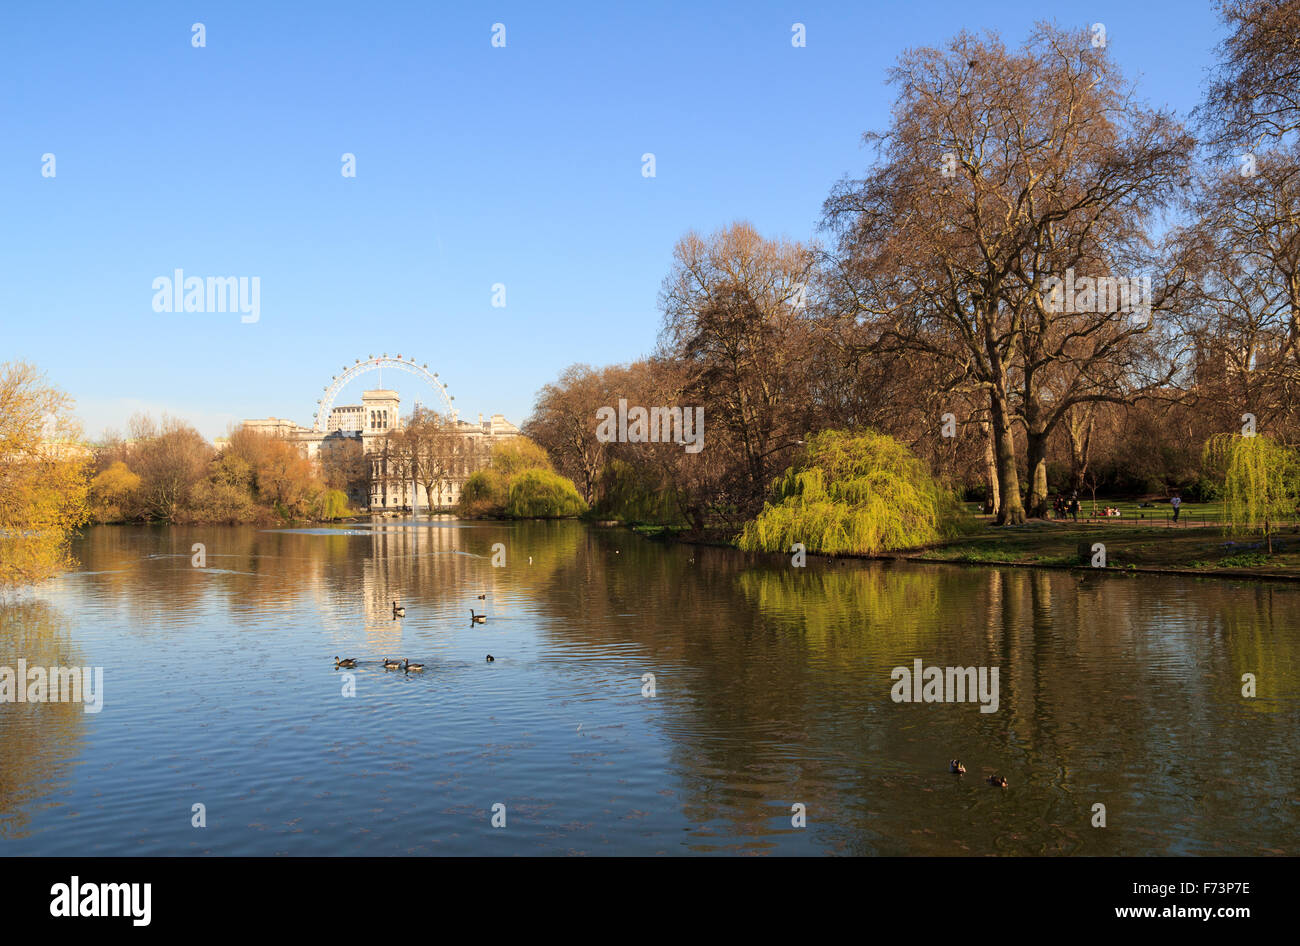 St. James Park with London Eye and Horse Guards Buildings, London, UK. Stock Photo